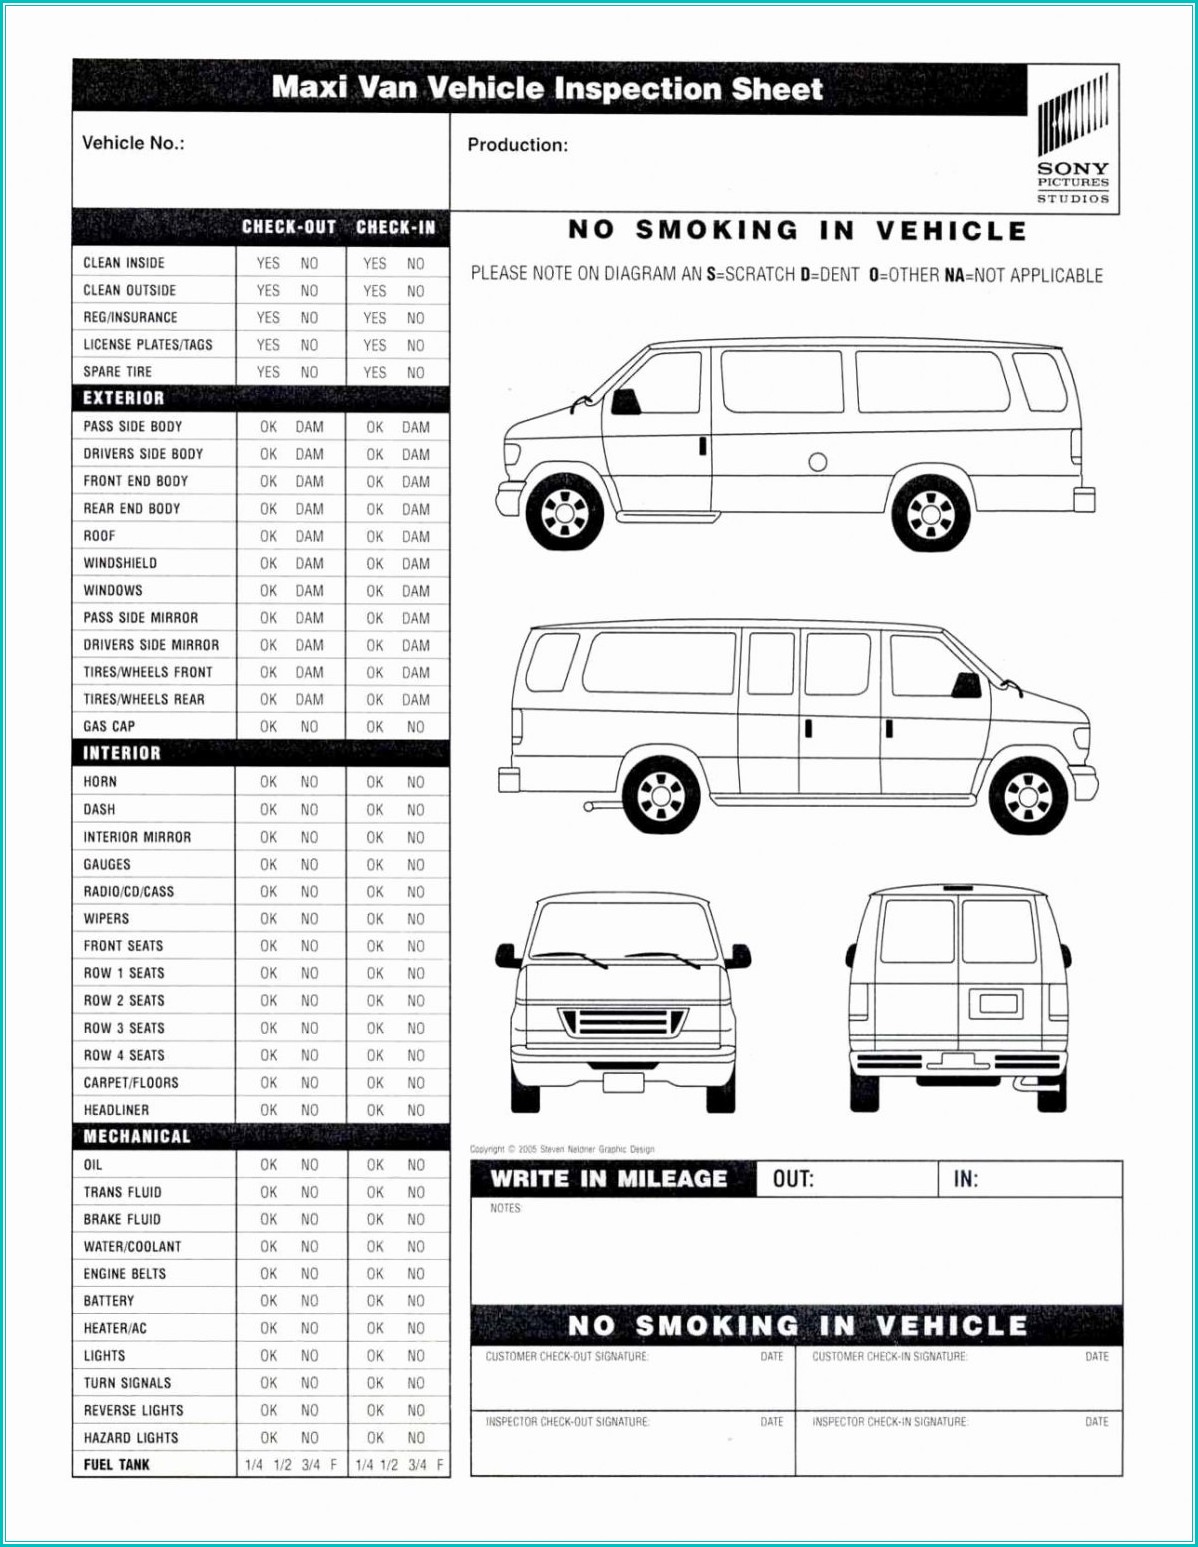 Vehicle Inspection Form Template Pdf